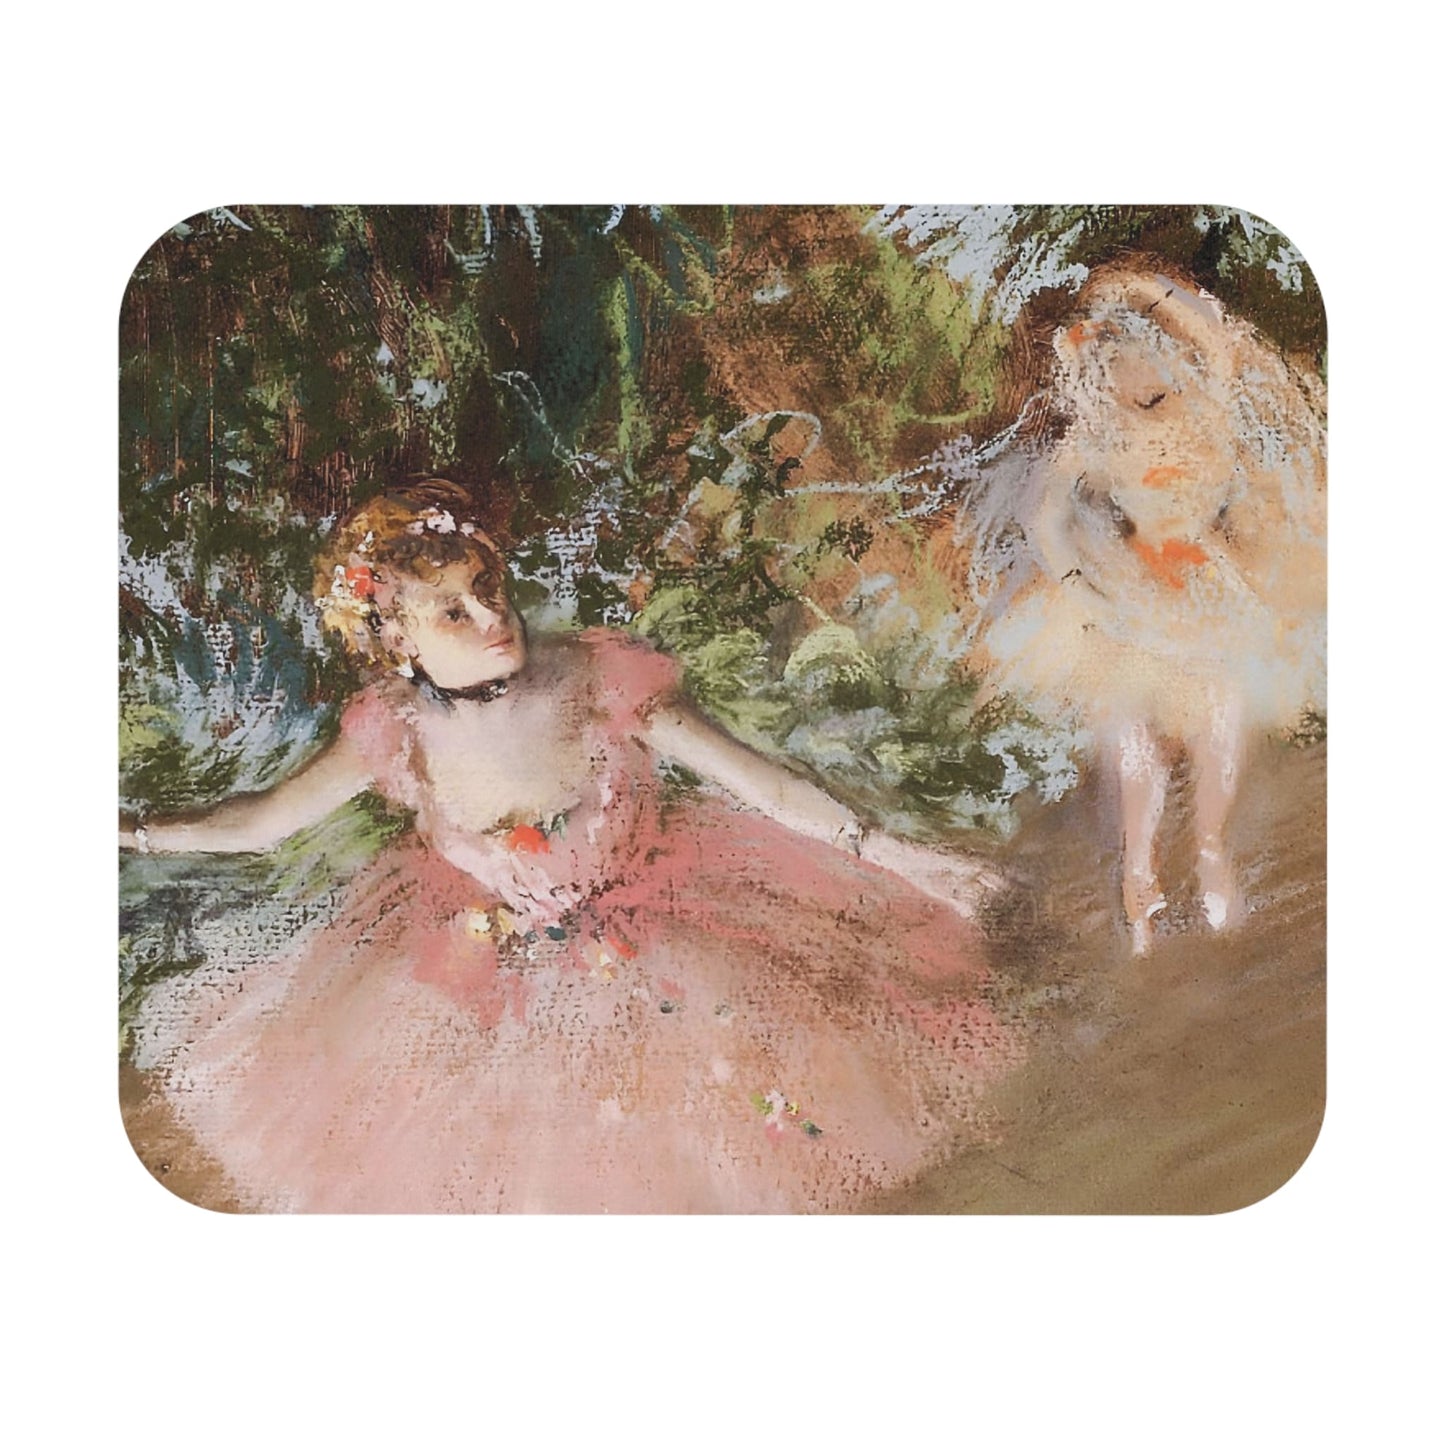 Impressionist Ballerina Mouse Pad featuring Edgar Degas art, ideal for desk and office decor.